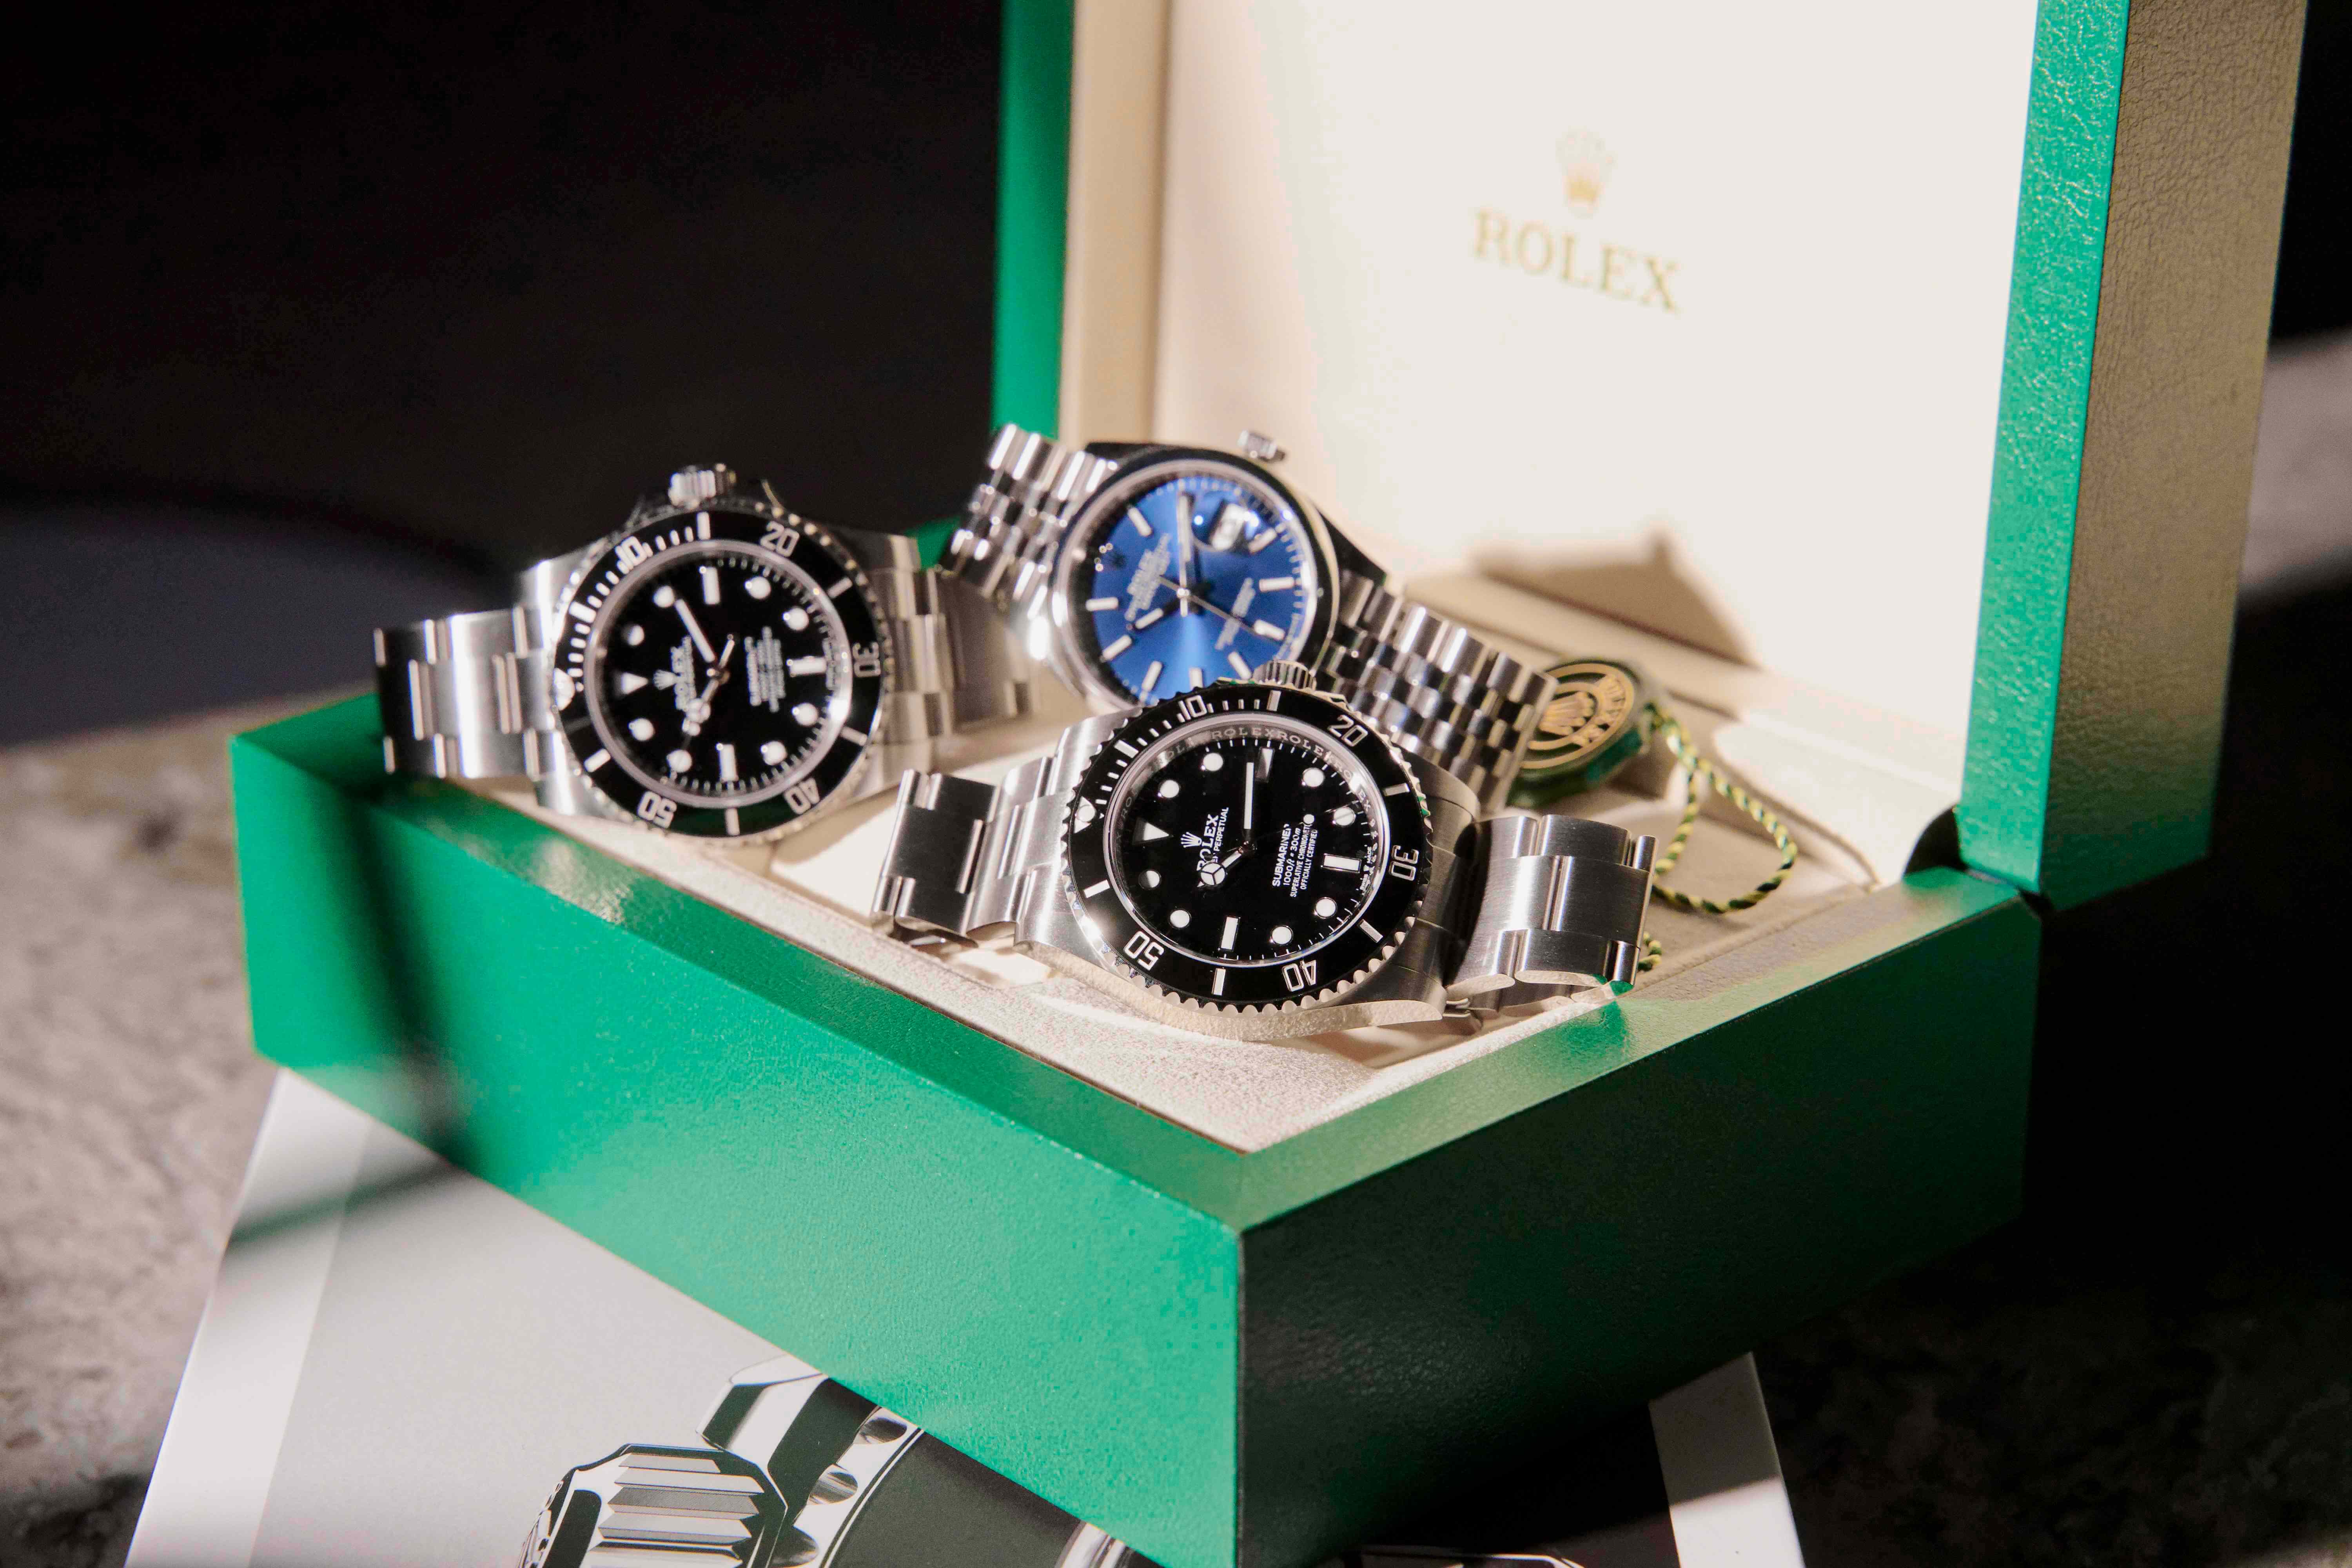 The Best Place To Sell Your Luxury Watches And Jewelry: Rolex